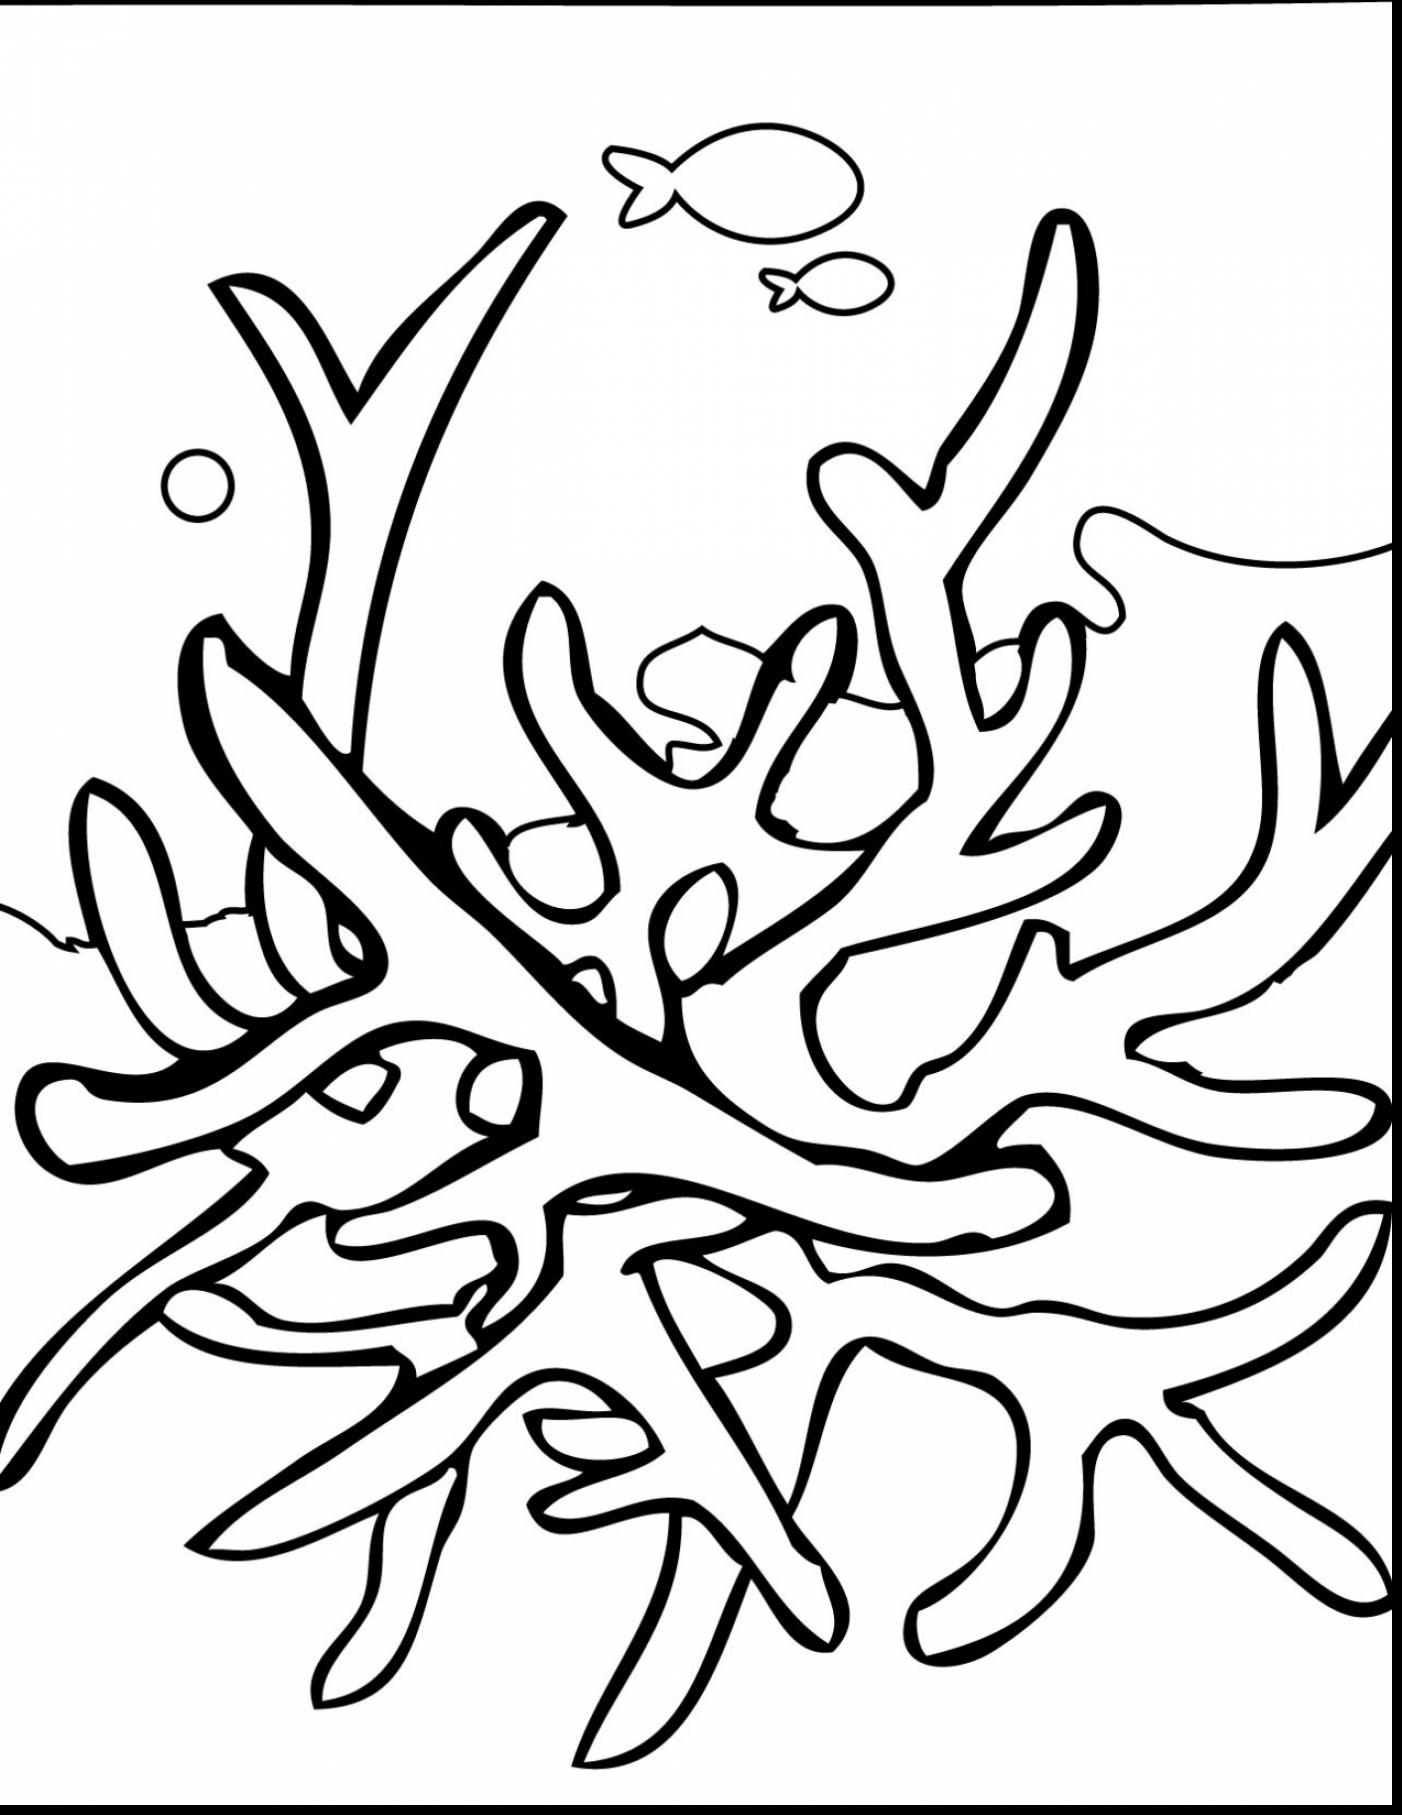 158 Cartoon Underwater Plants Coloring Pages for Adult